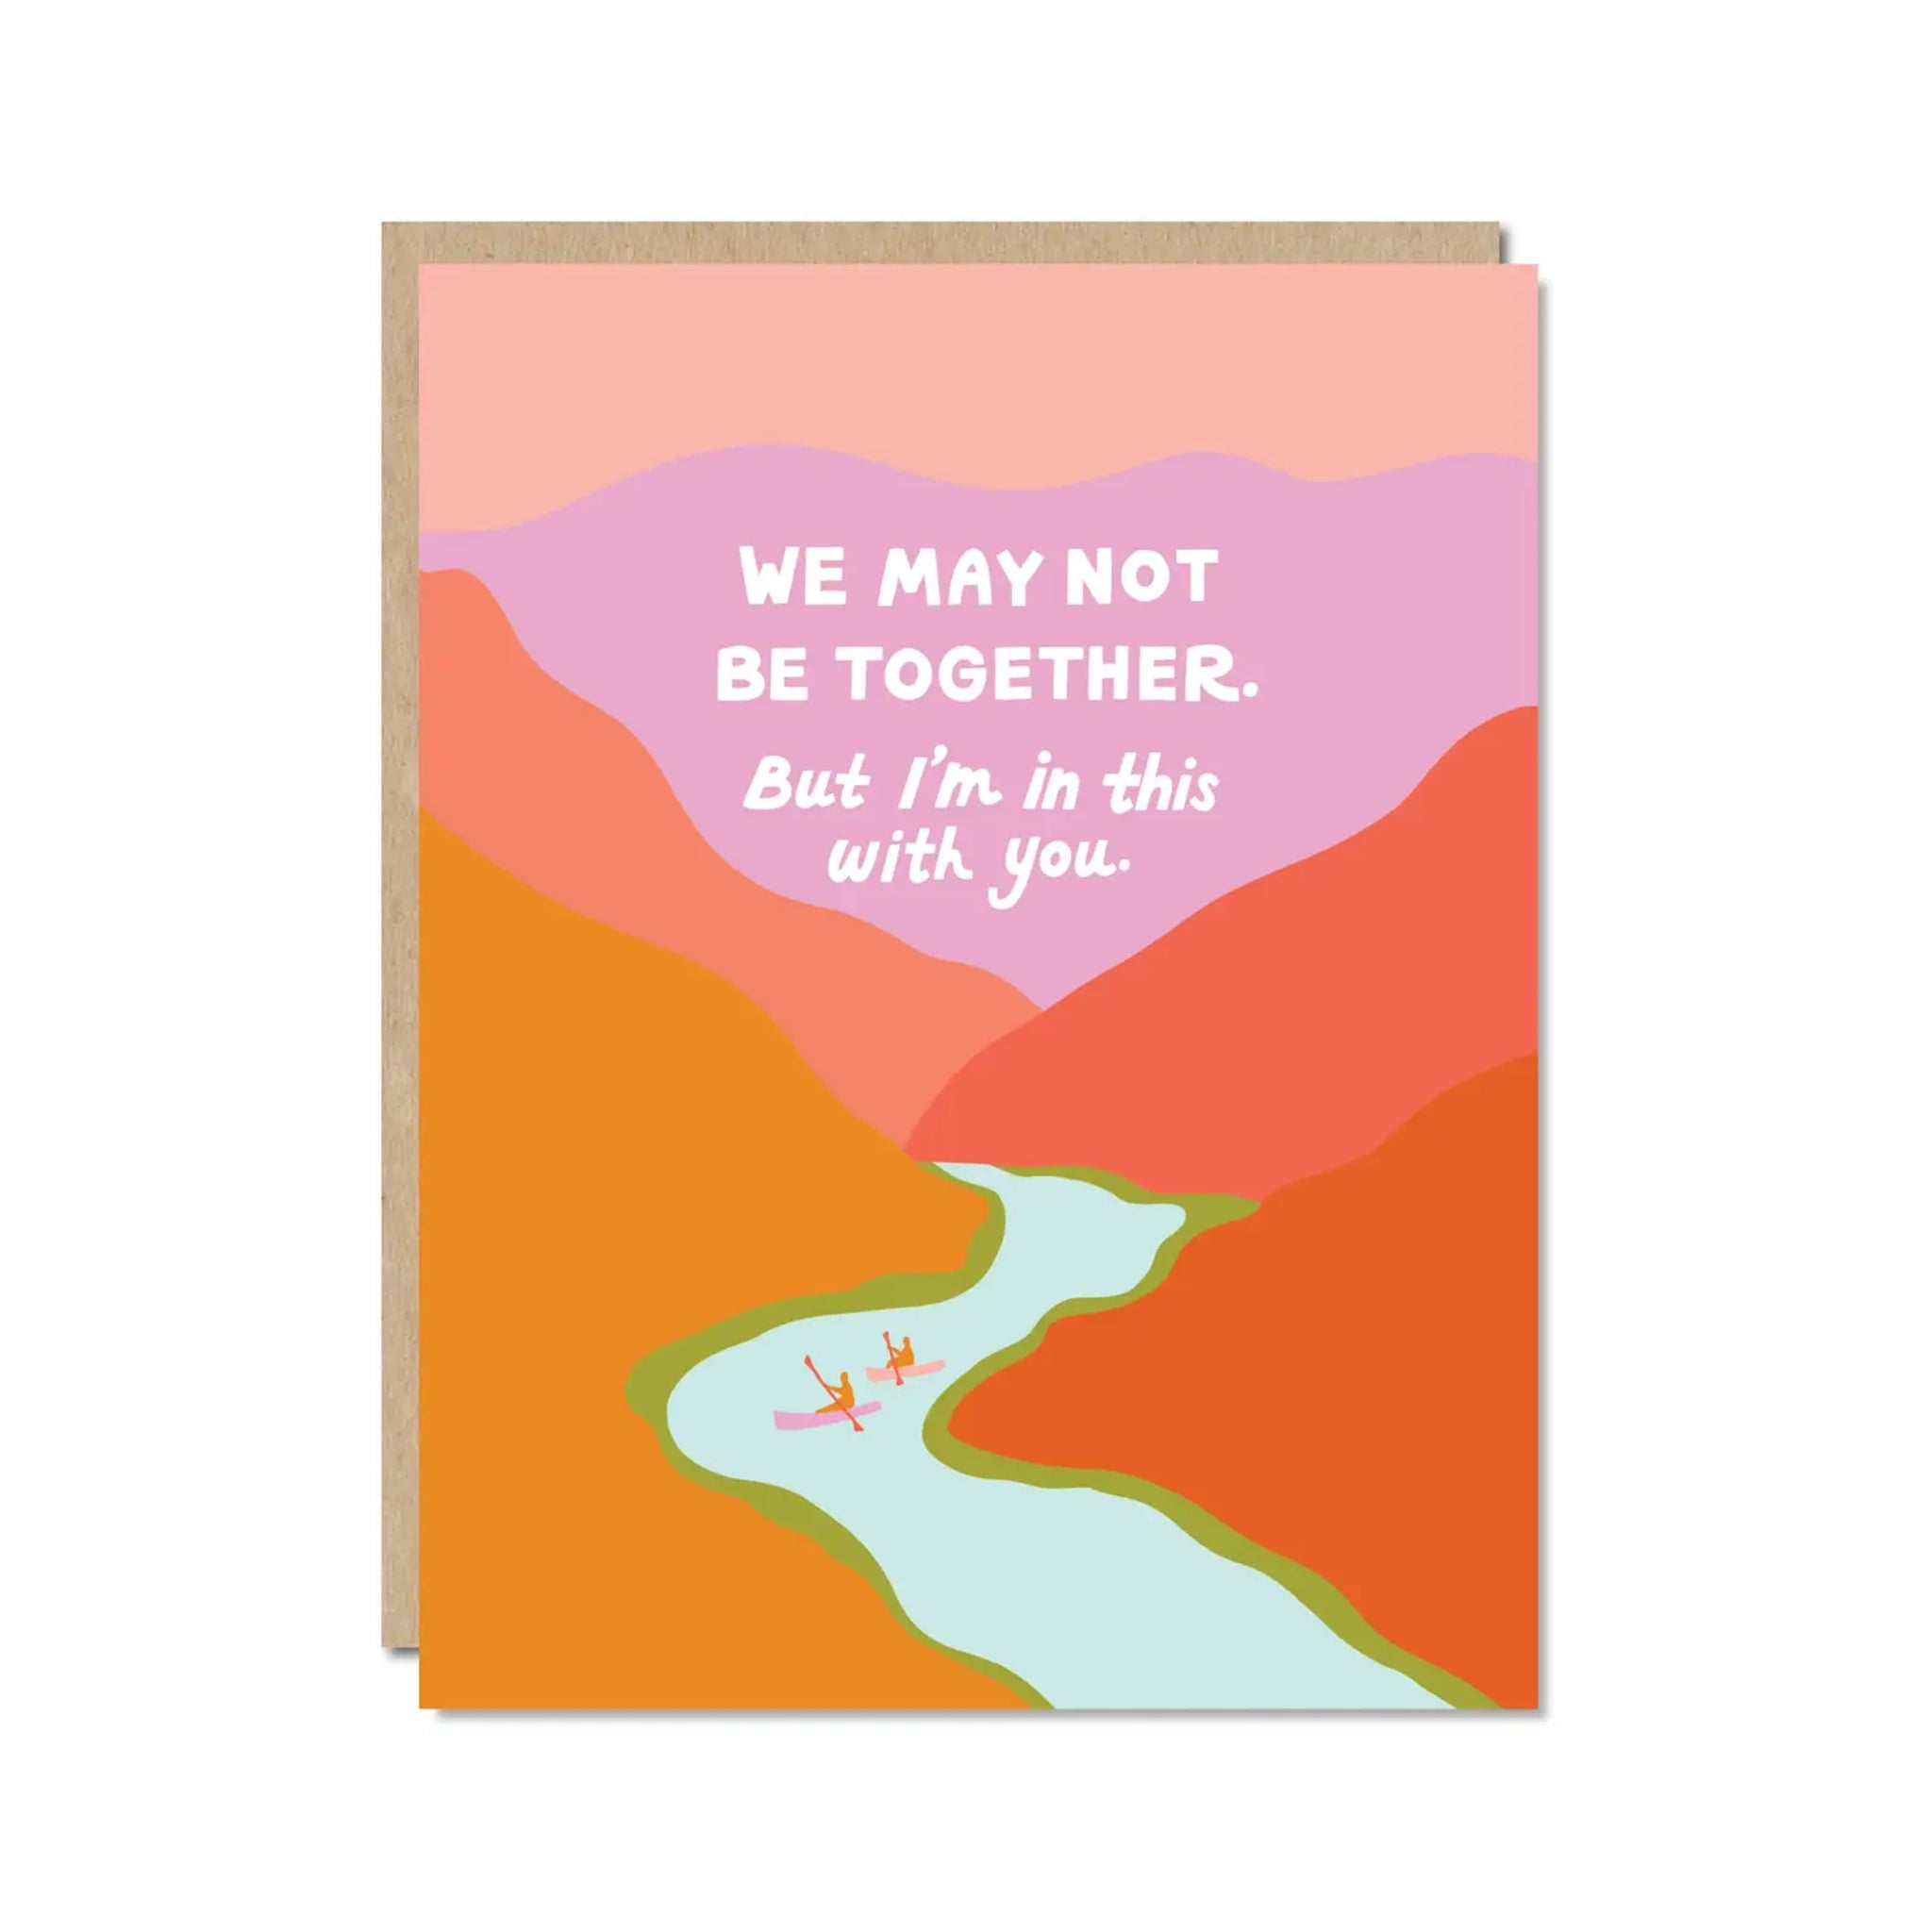 On a white background is a vibrant card with shades of orange, red, pink and purple making up a mountainous range with a river running through it along with white text at the top of the card that reads, "We May Not Be Together But I'm In This With You". 